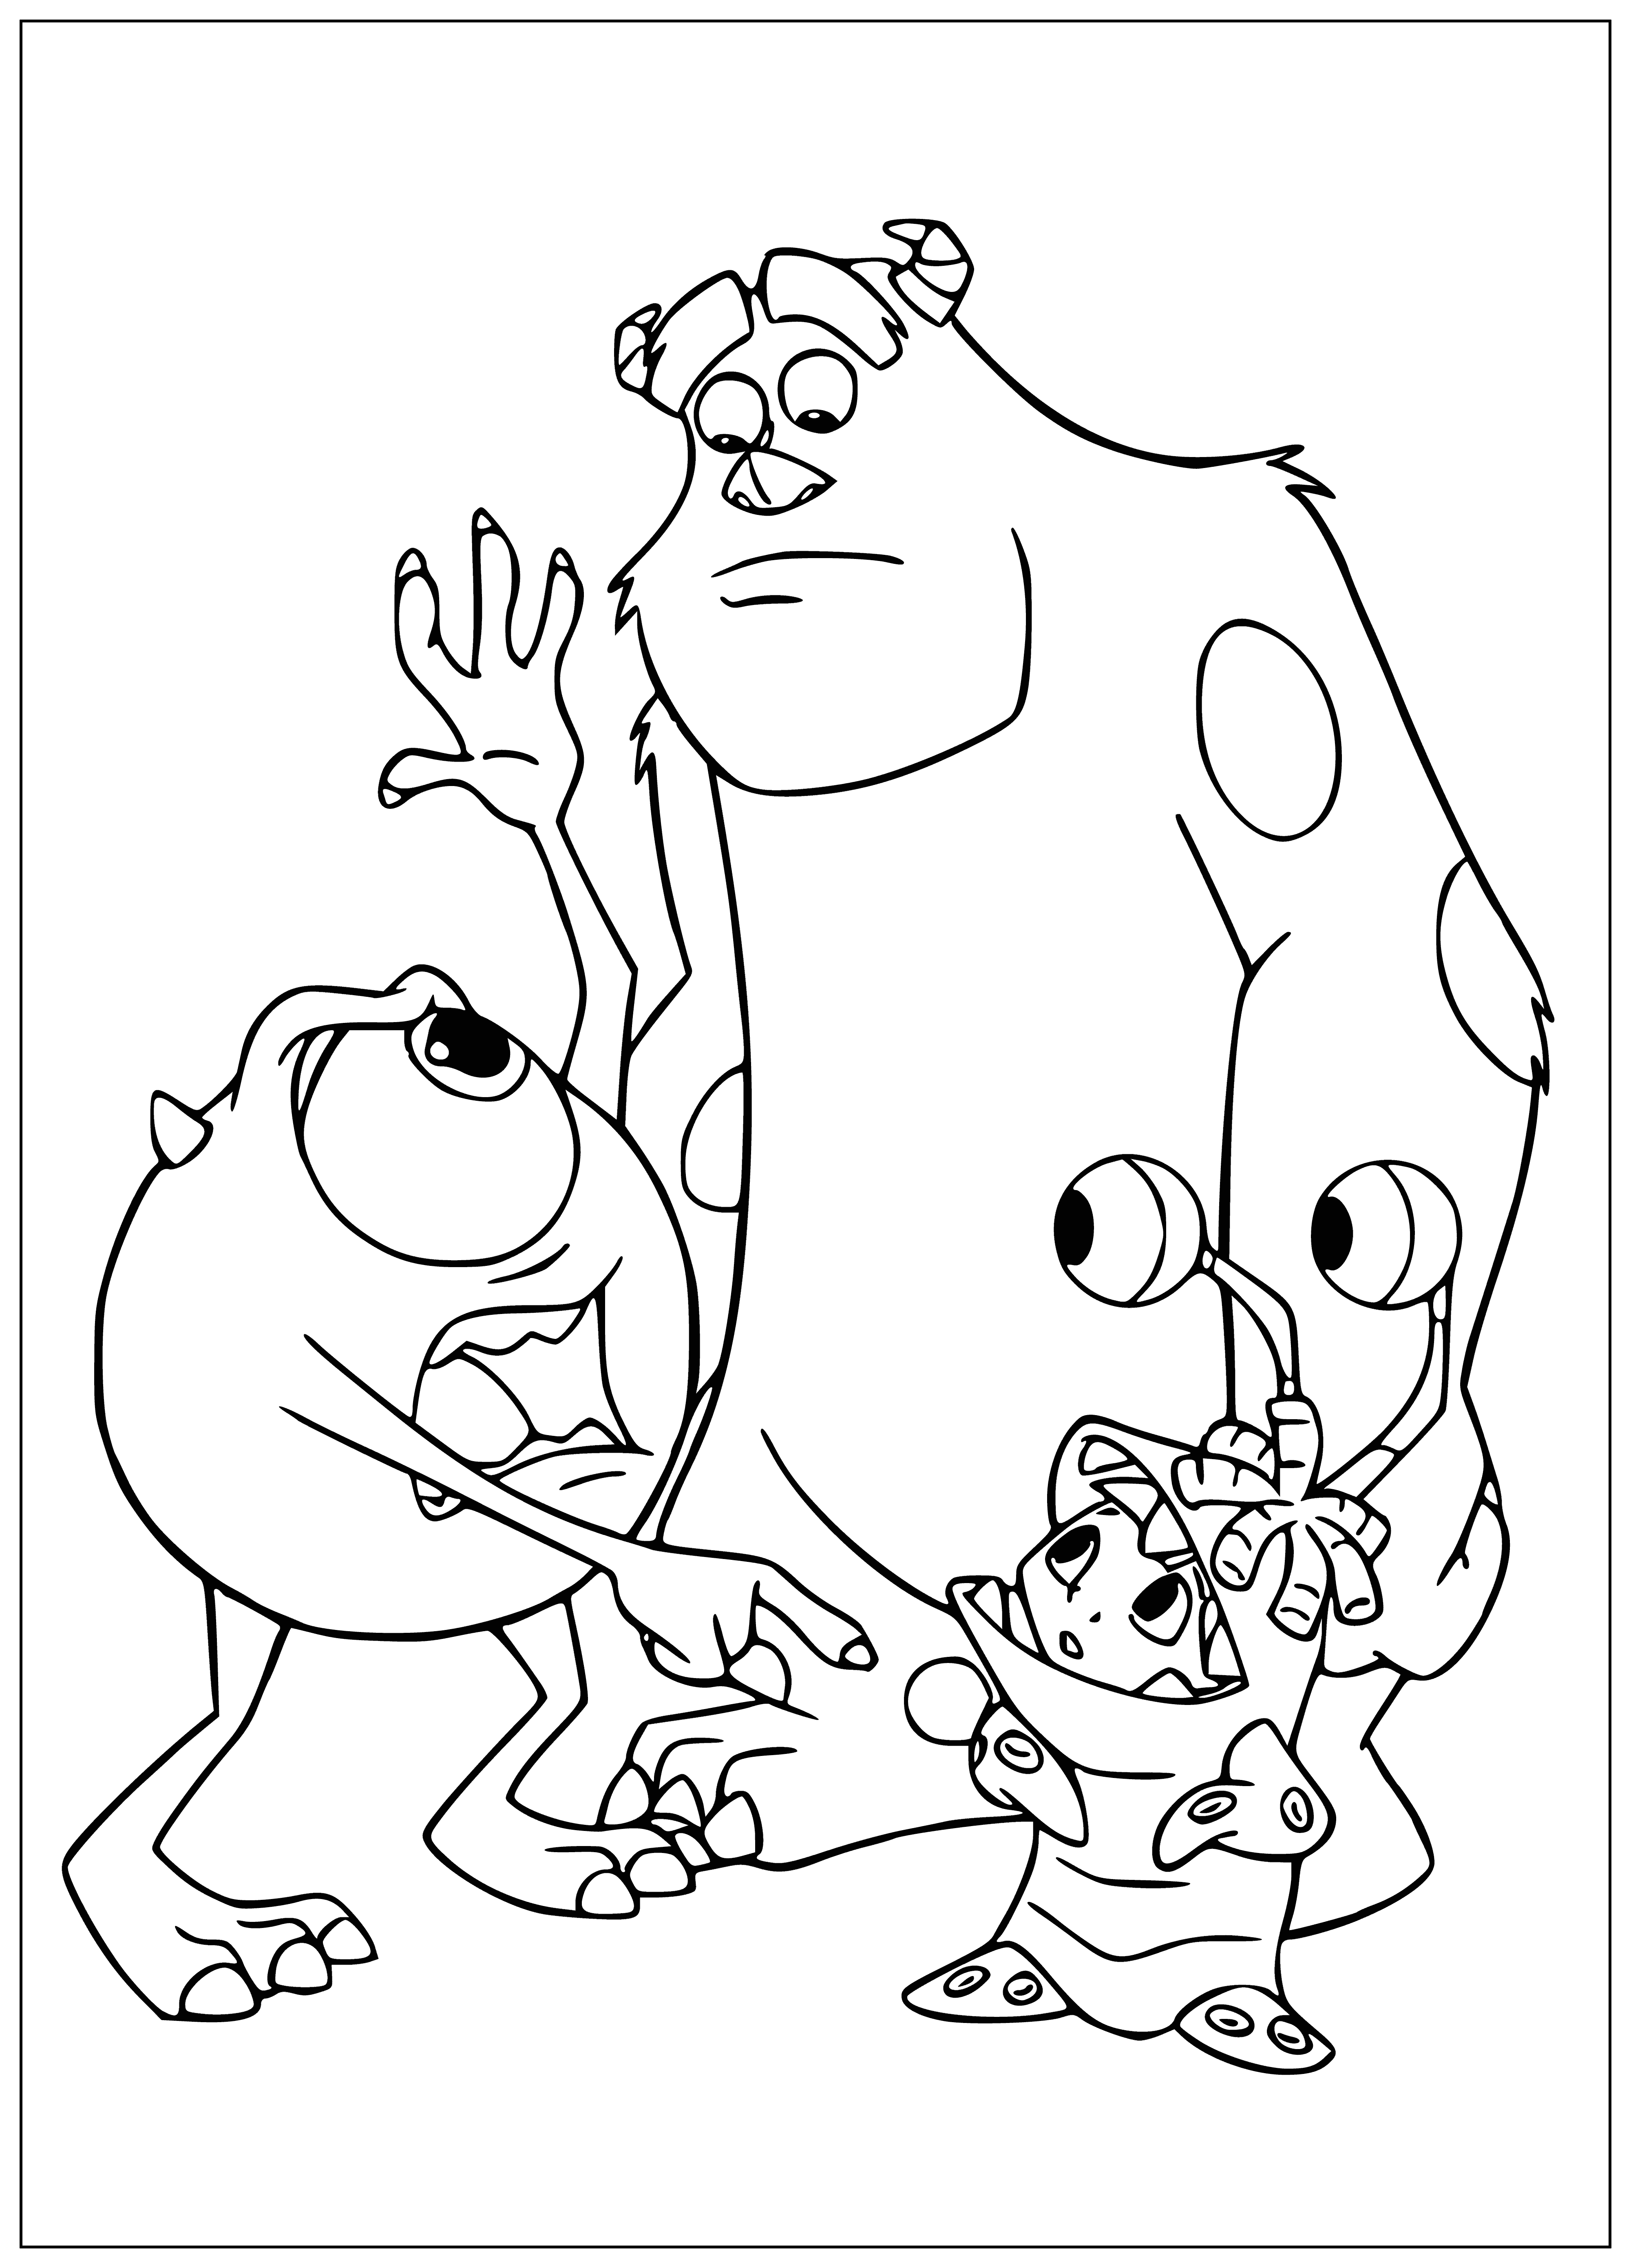 coloring page: Large blue monster comforting smaller purple one, both looking concerned.